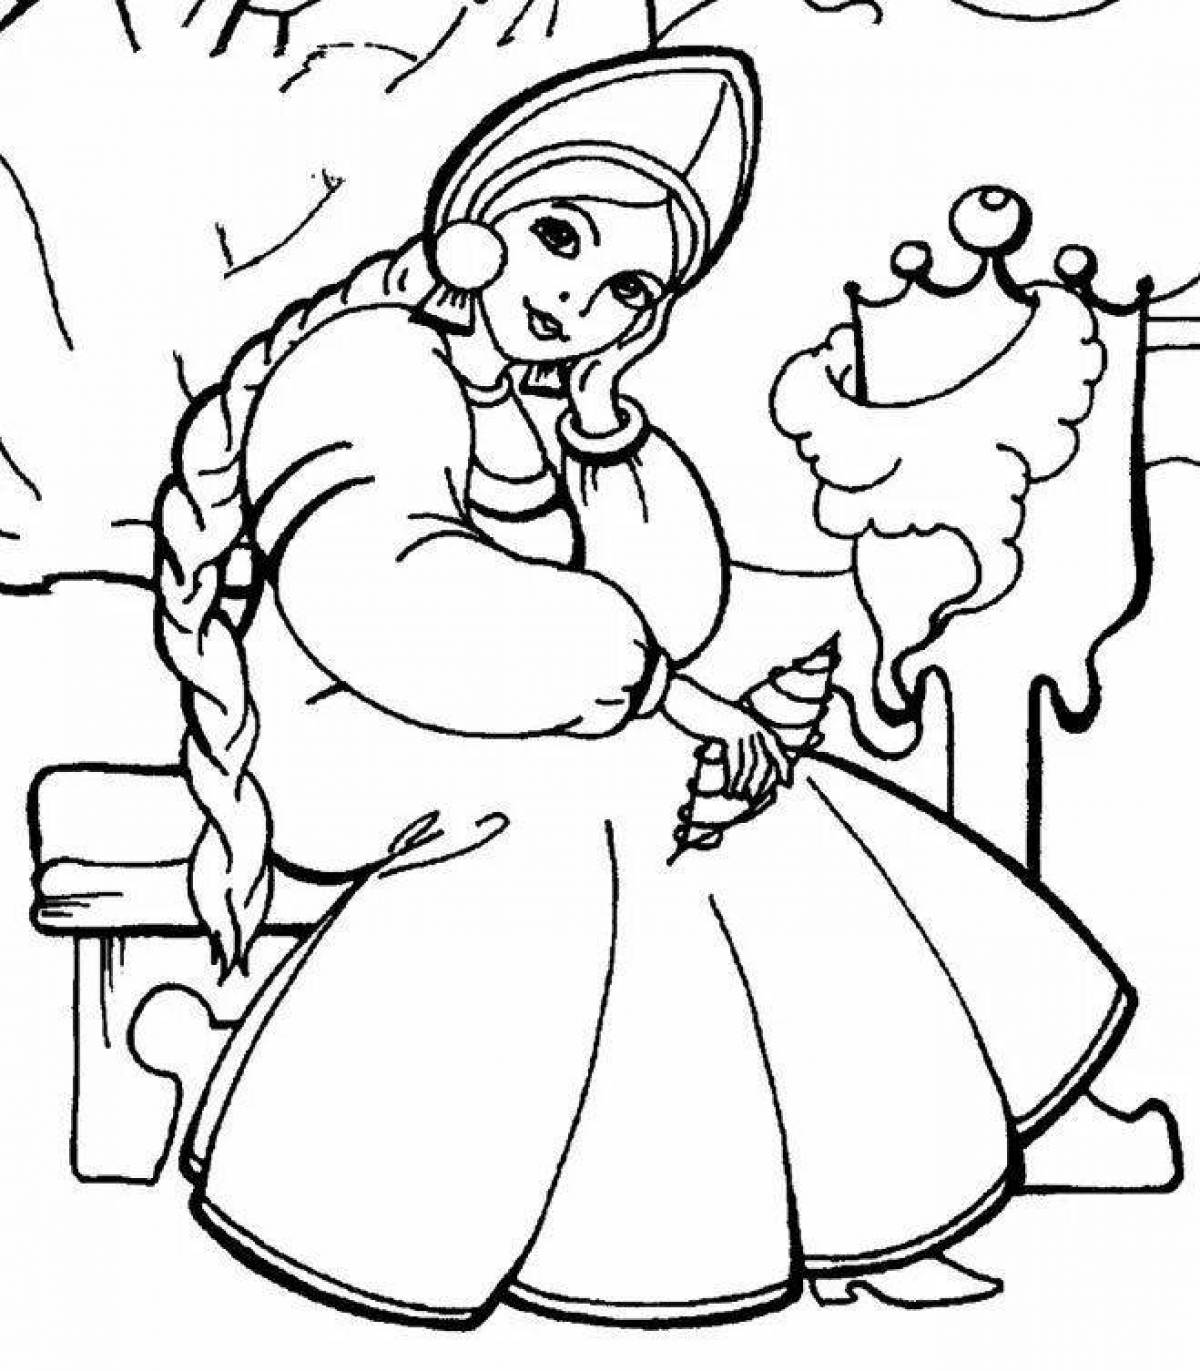 Brilliant coloring book for children 4-5 years old based on Pushkin's fairy tales